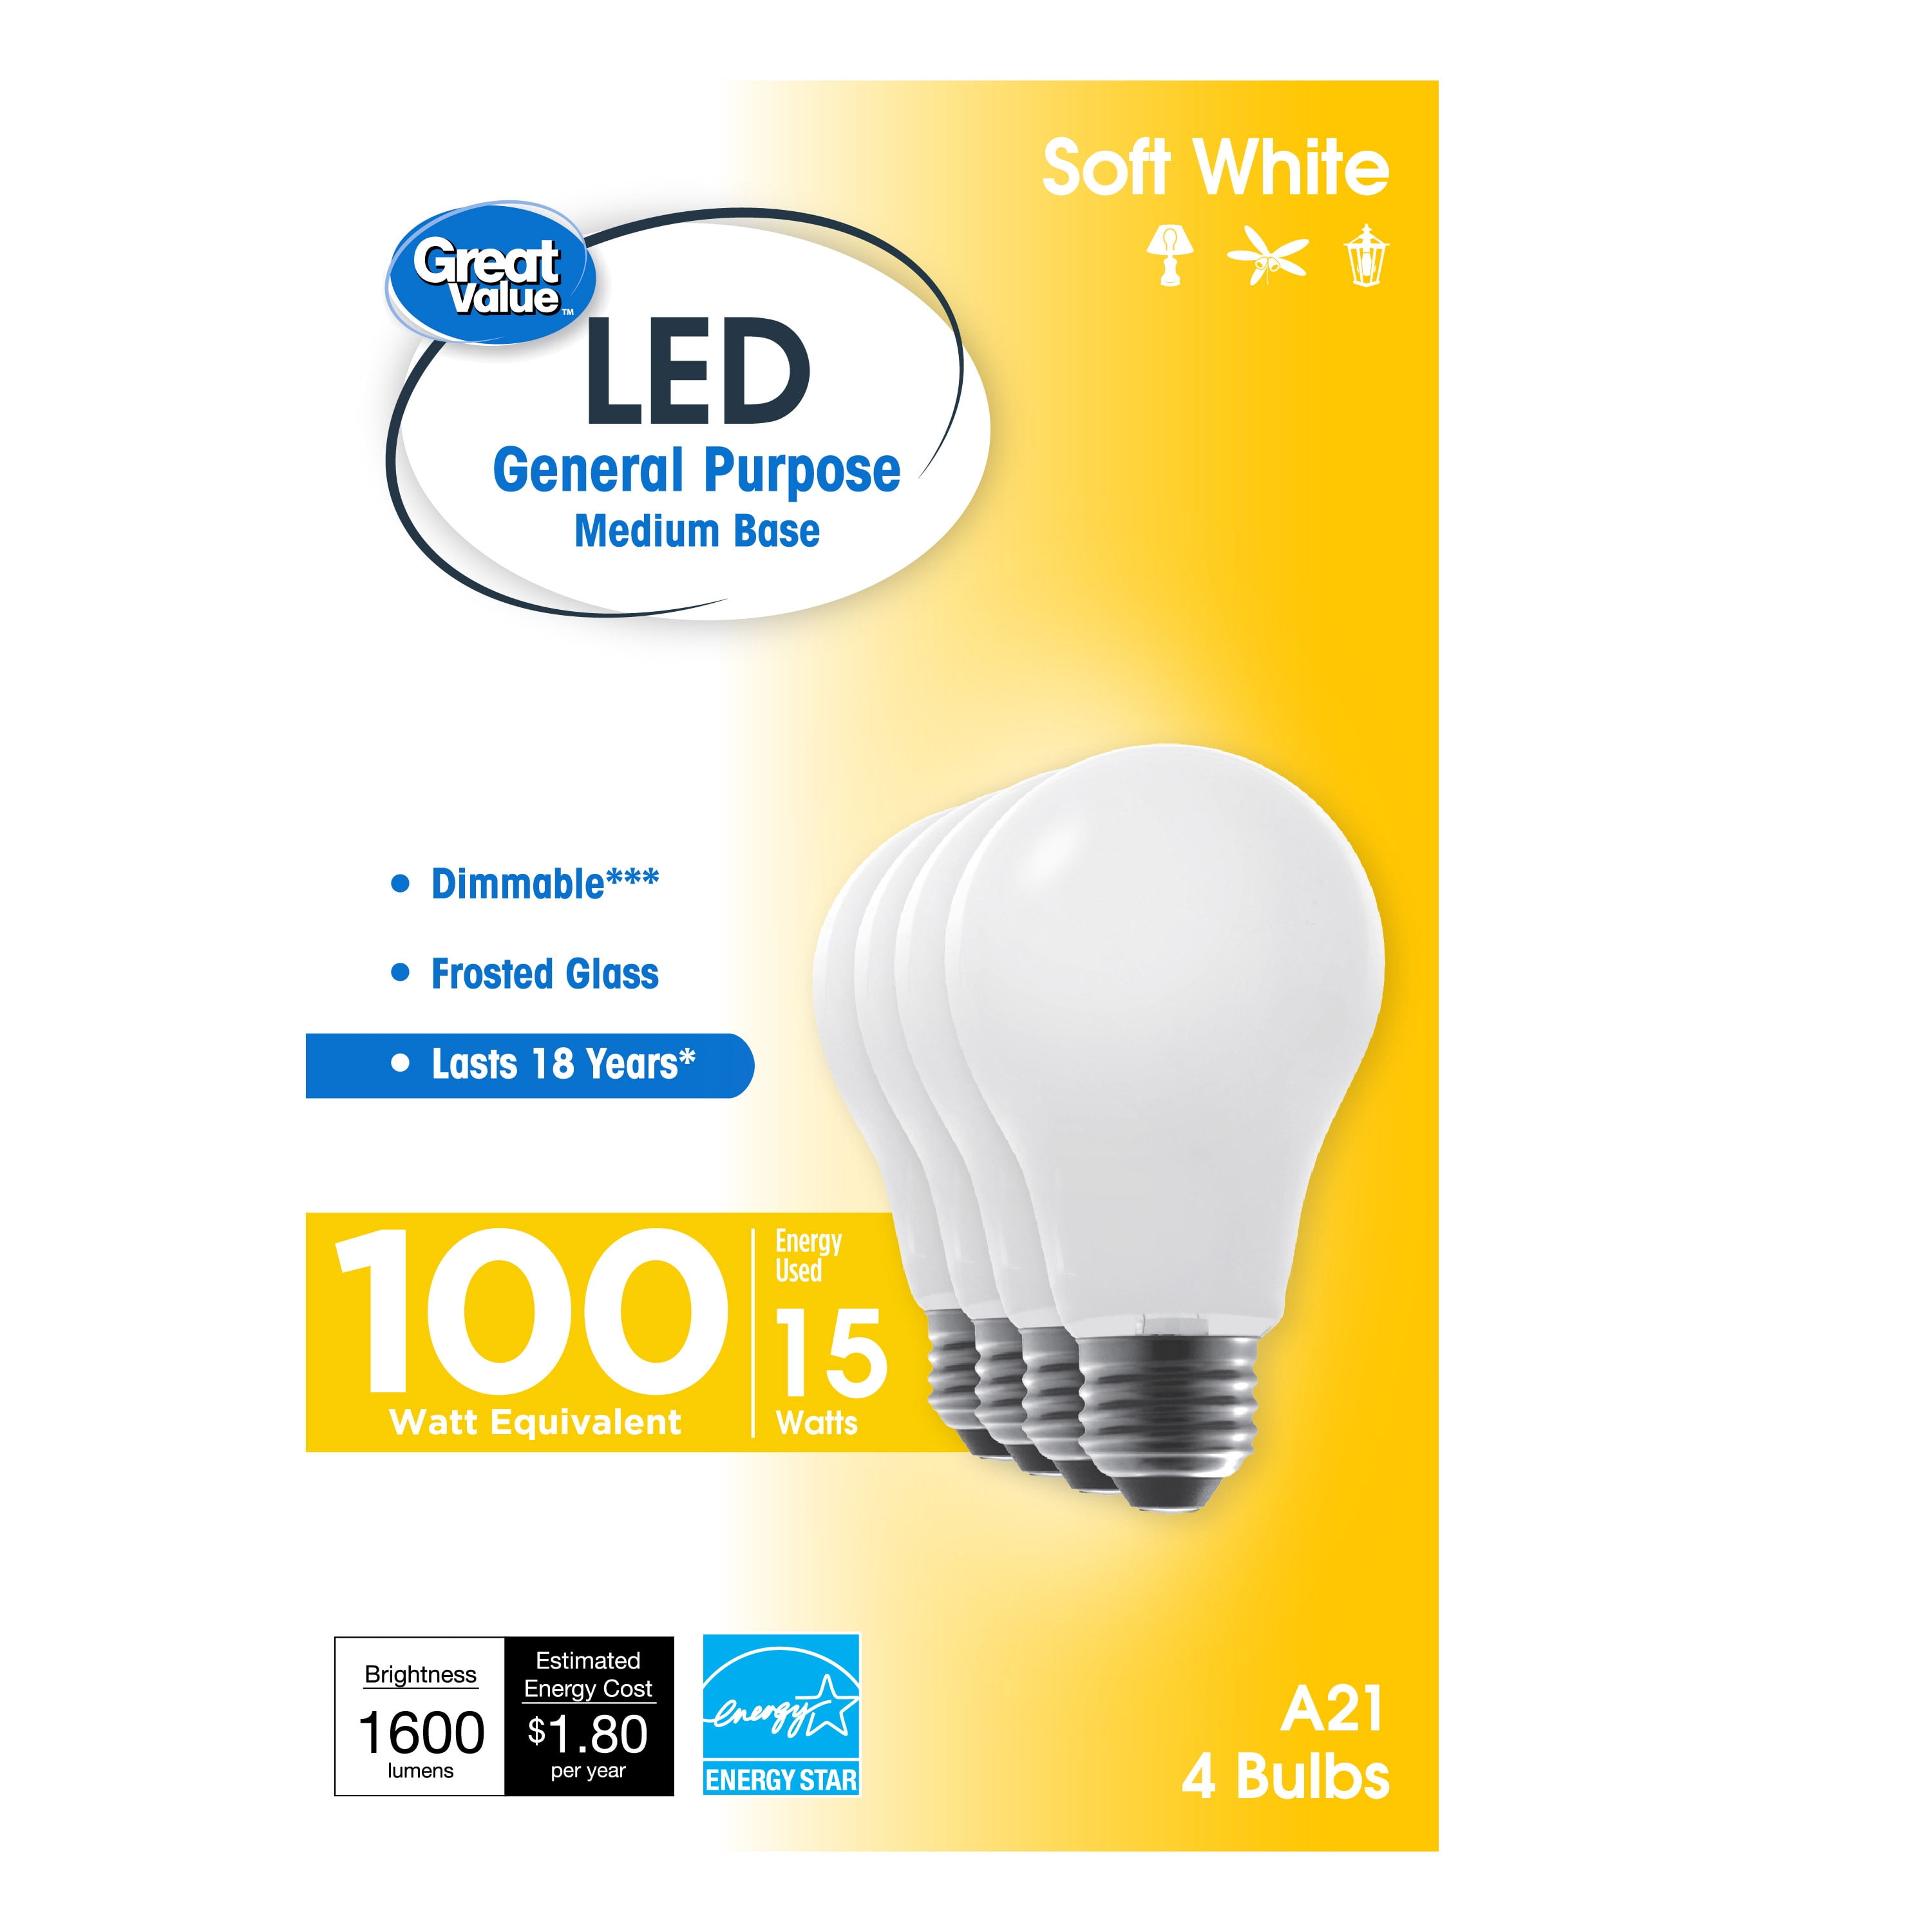 Great Value 18 Year LED Light Bulbs, A21 100 Watts 15 Efficient, Dimmable, Soft White, Glass, 4 Pack - Walmart.com